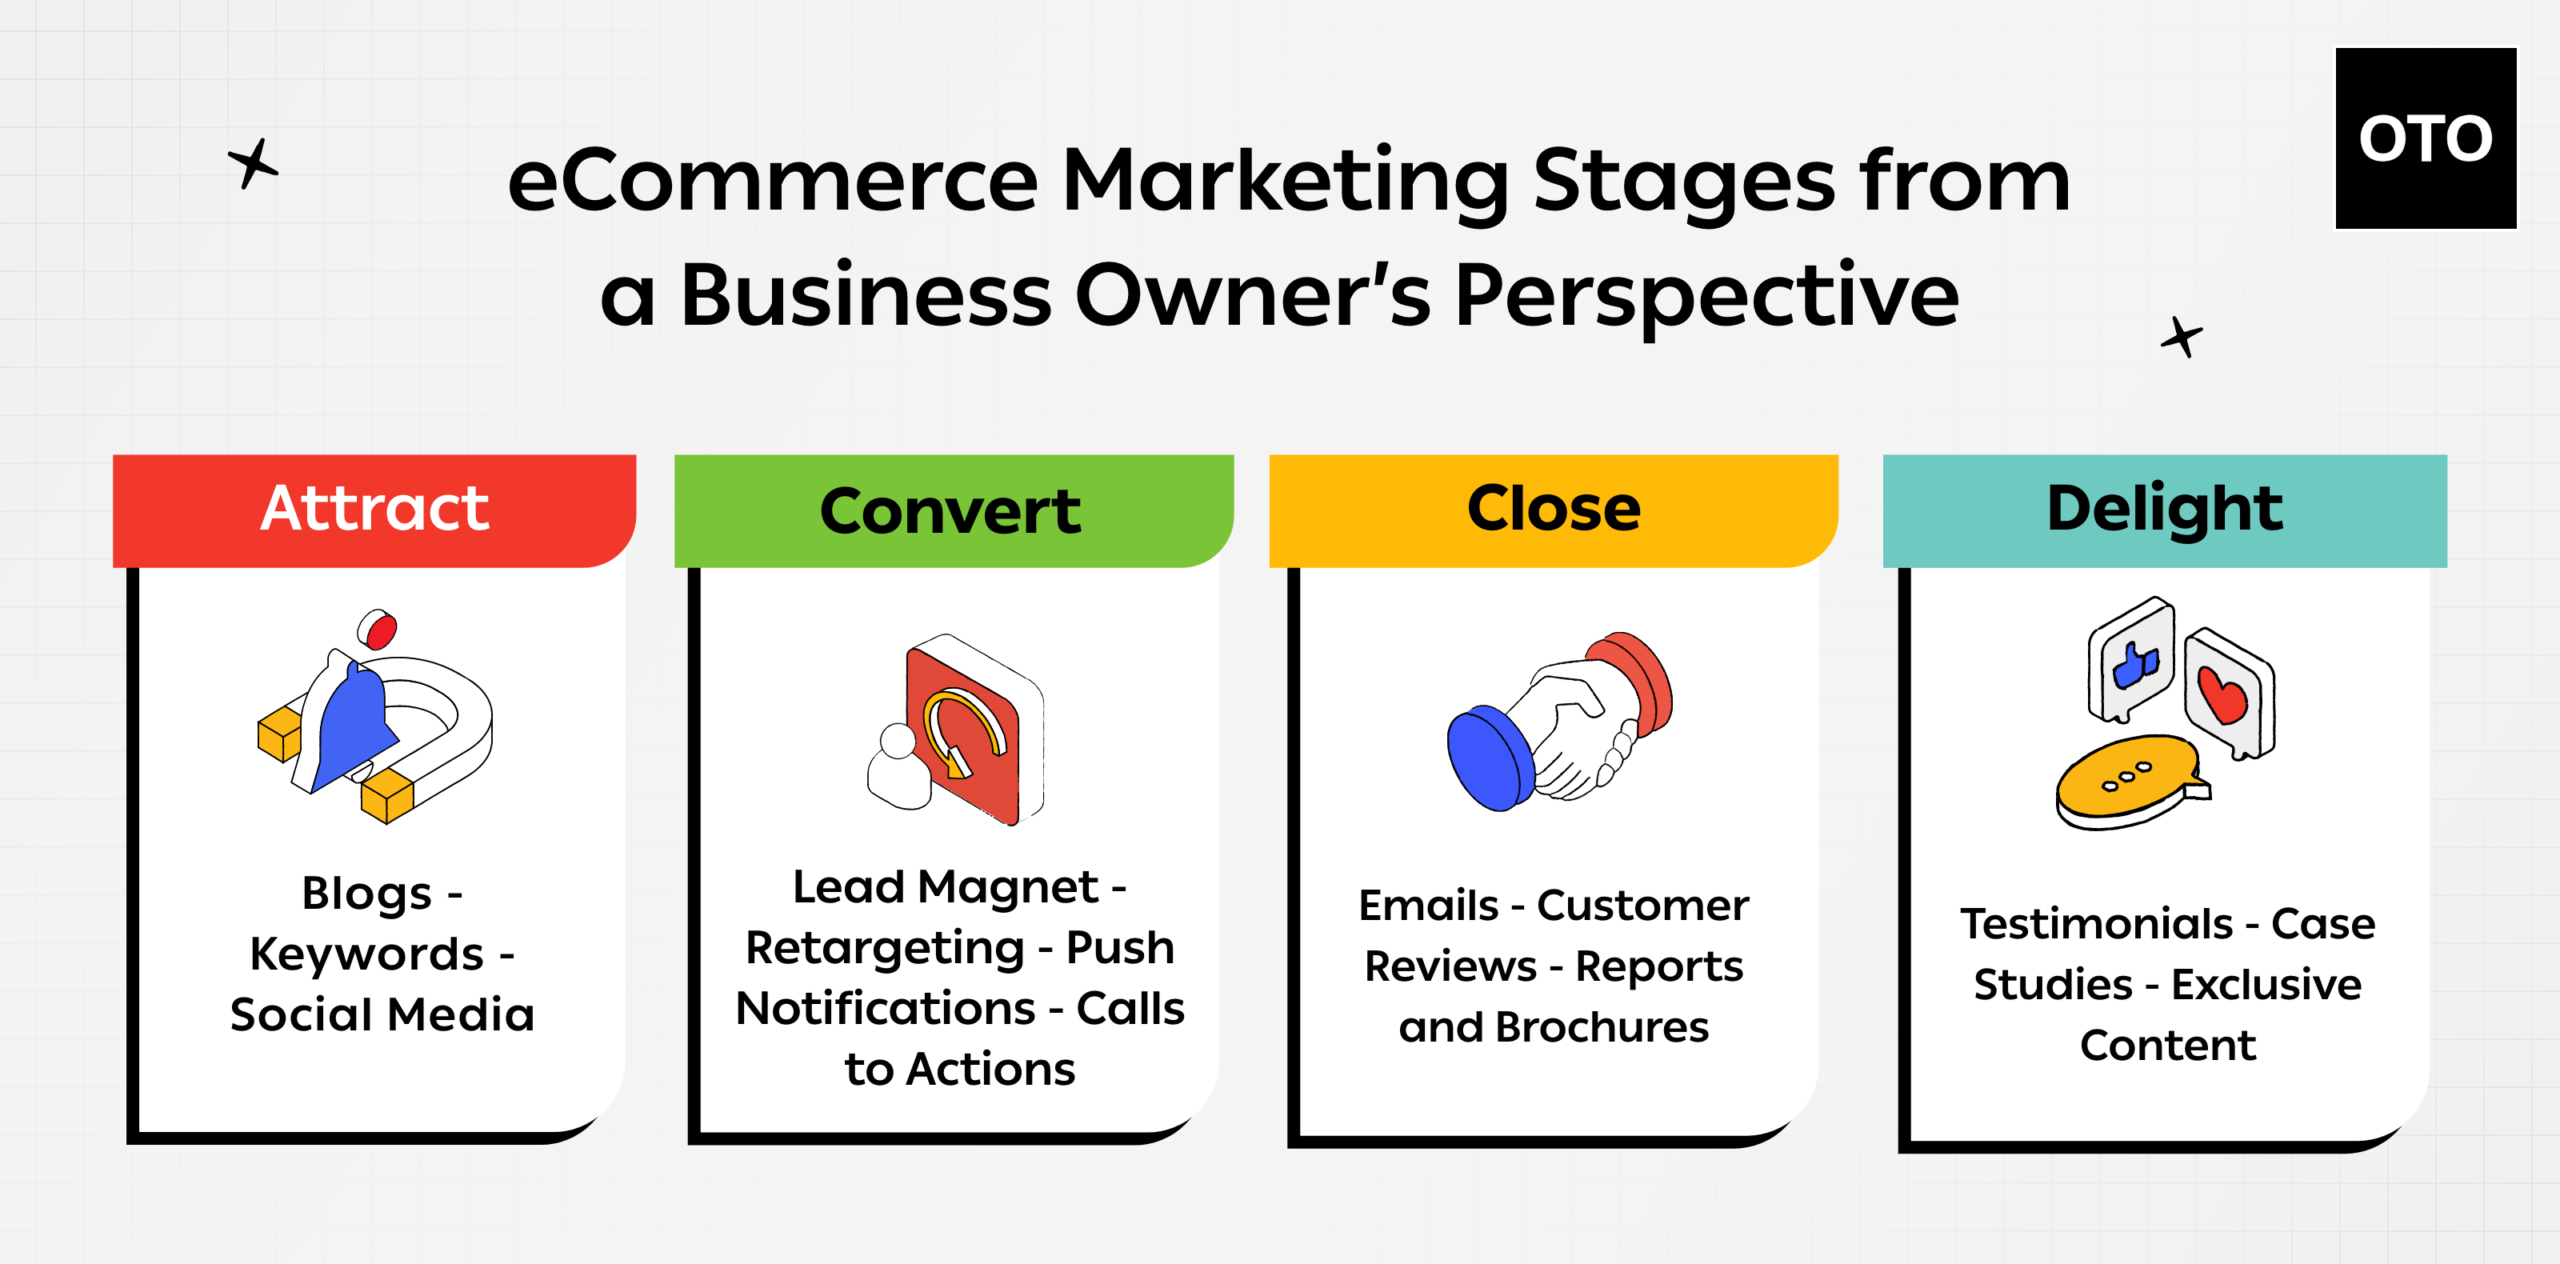 eCommerce marketing stages